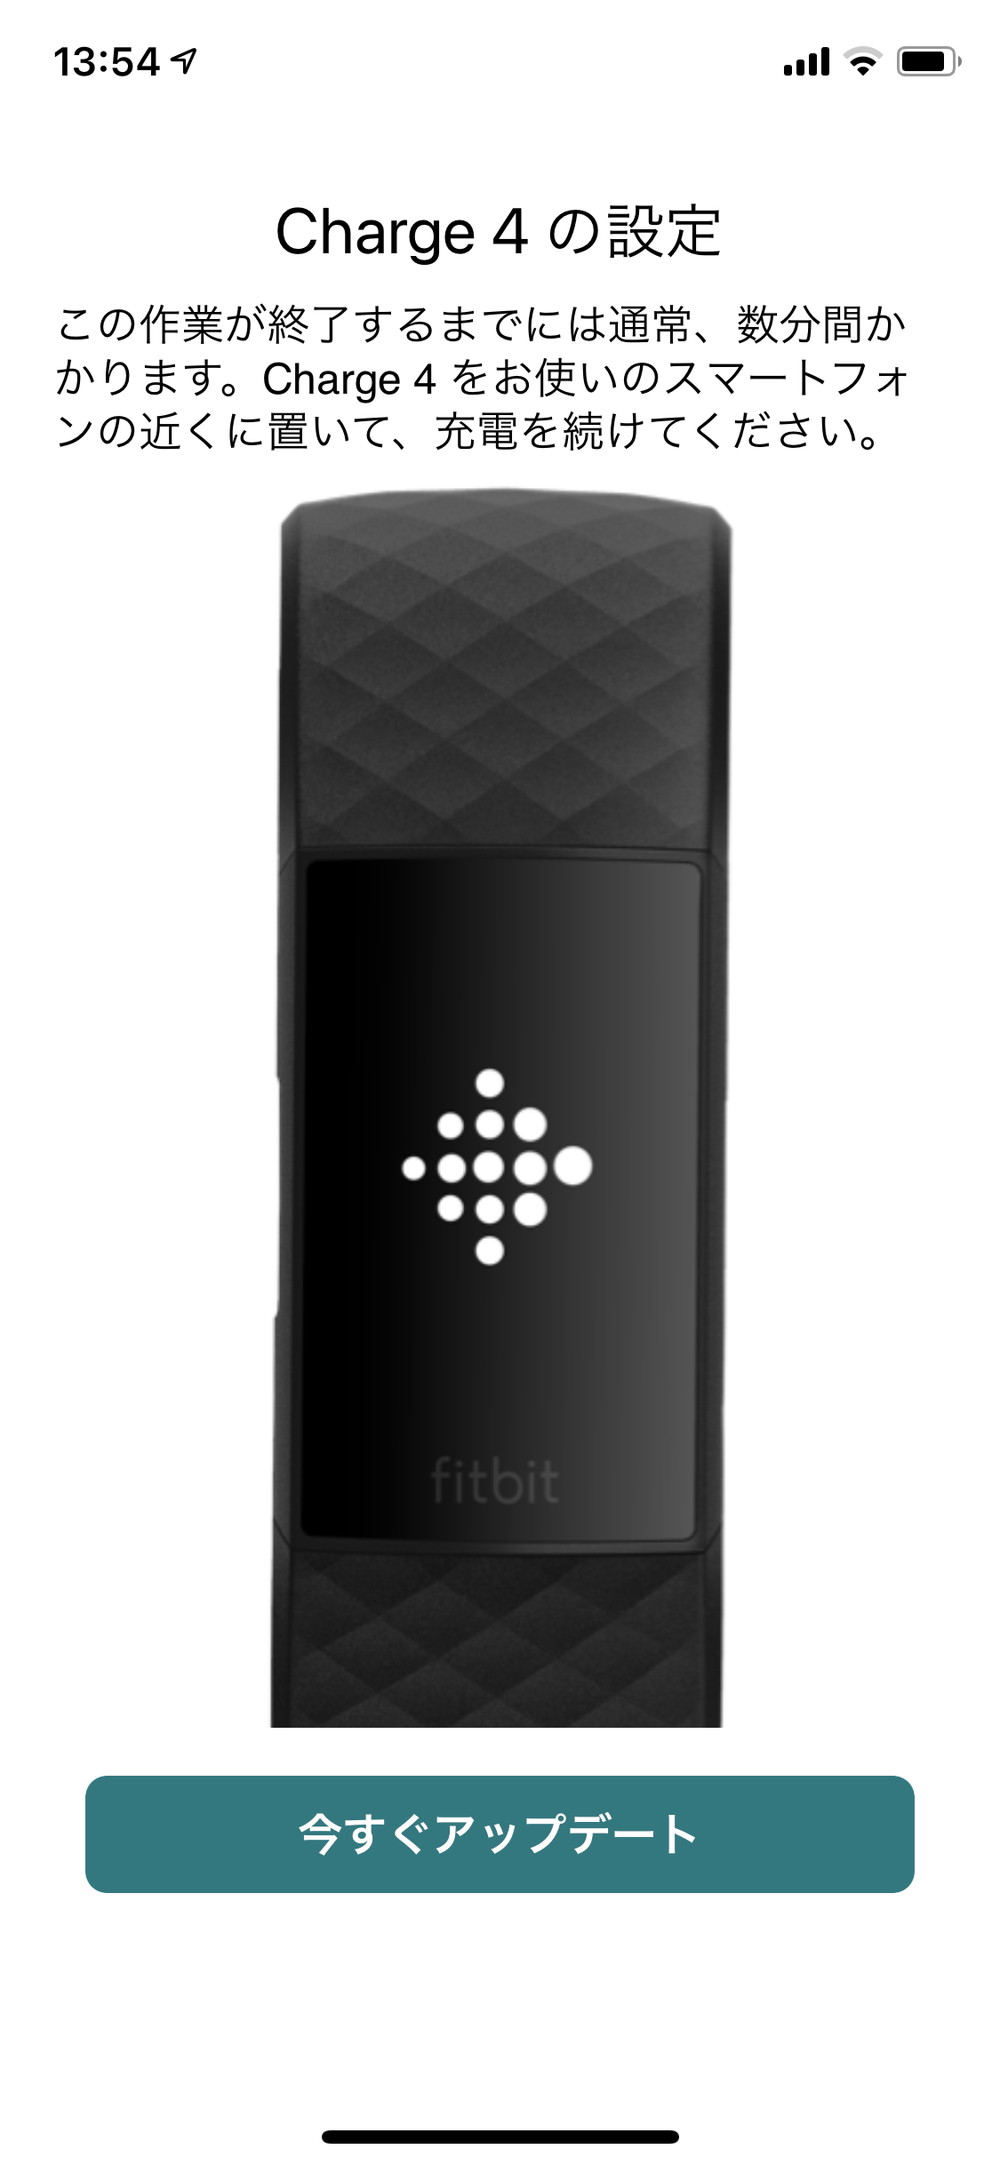 Fitbit 今すぐアップデート案内